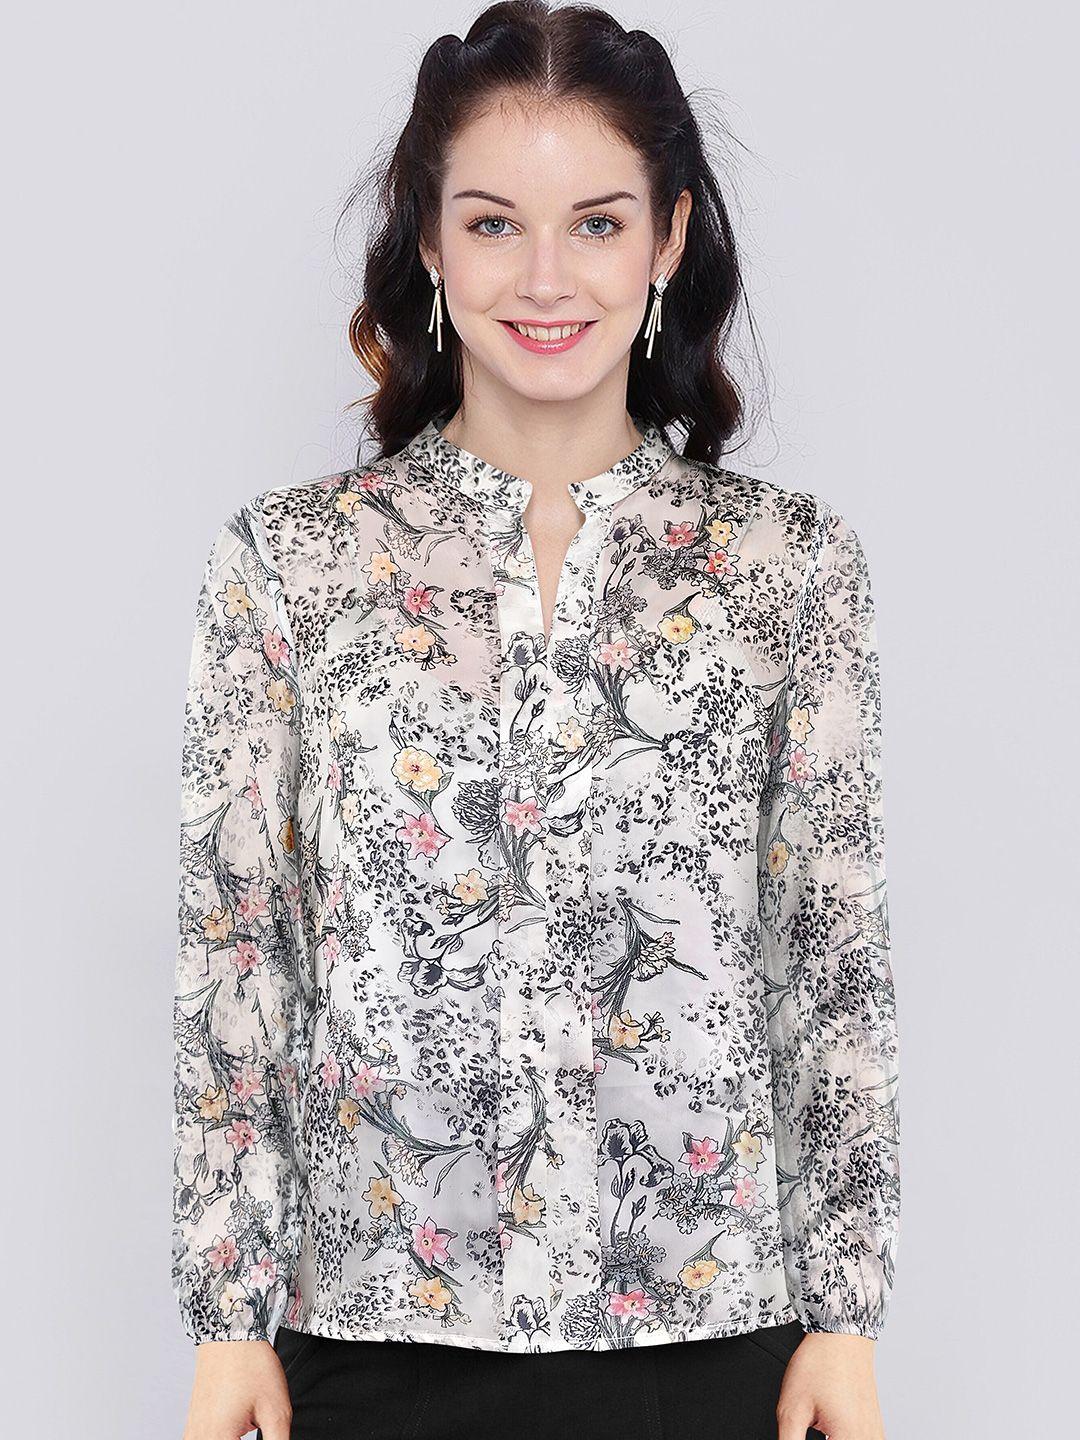 keri perry floral print georgette shirt style top